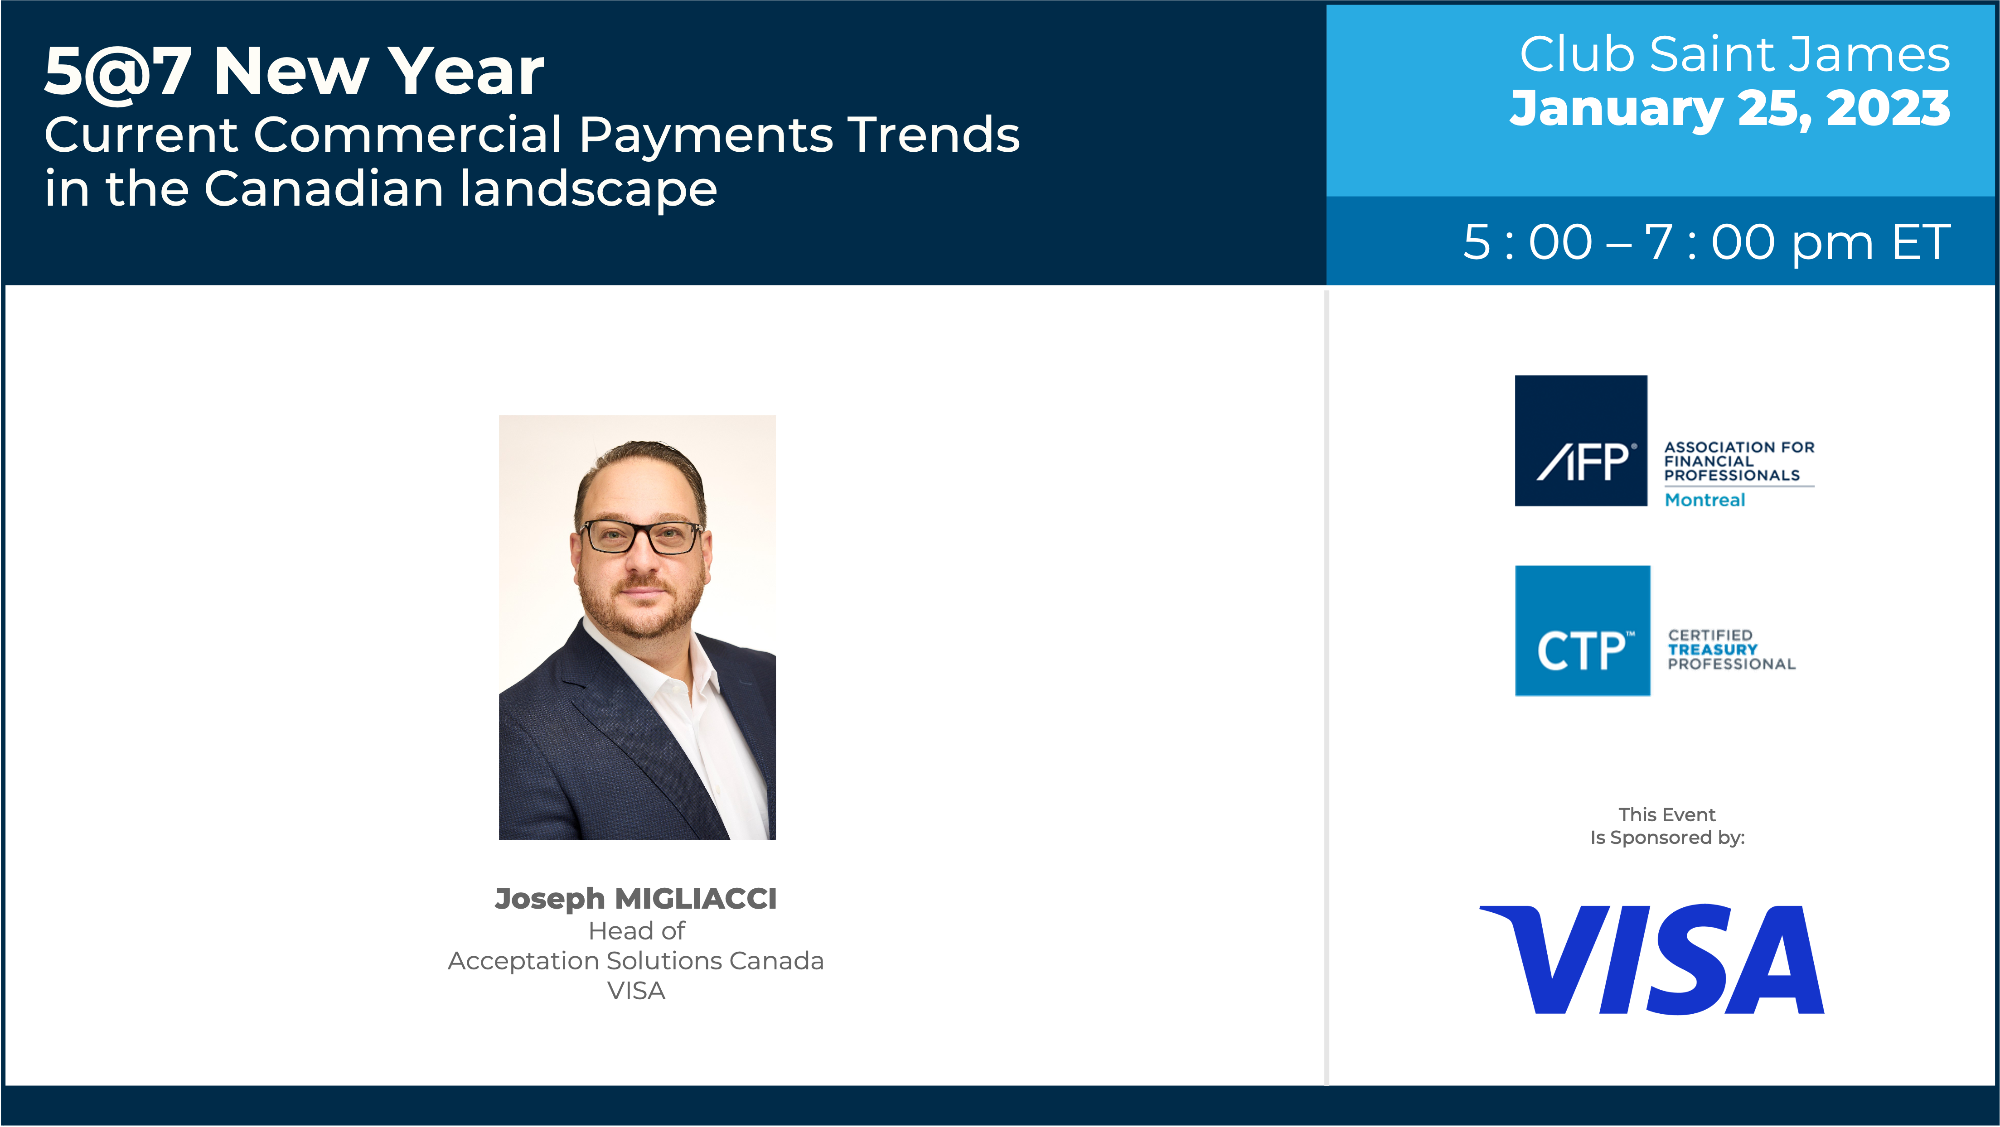 Payment Trends with VISA